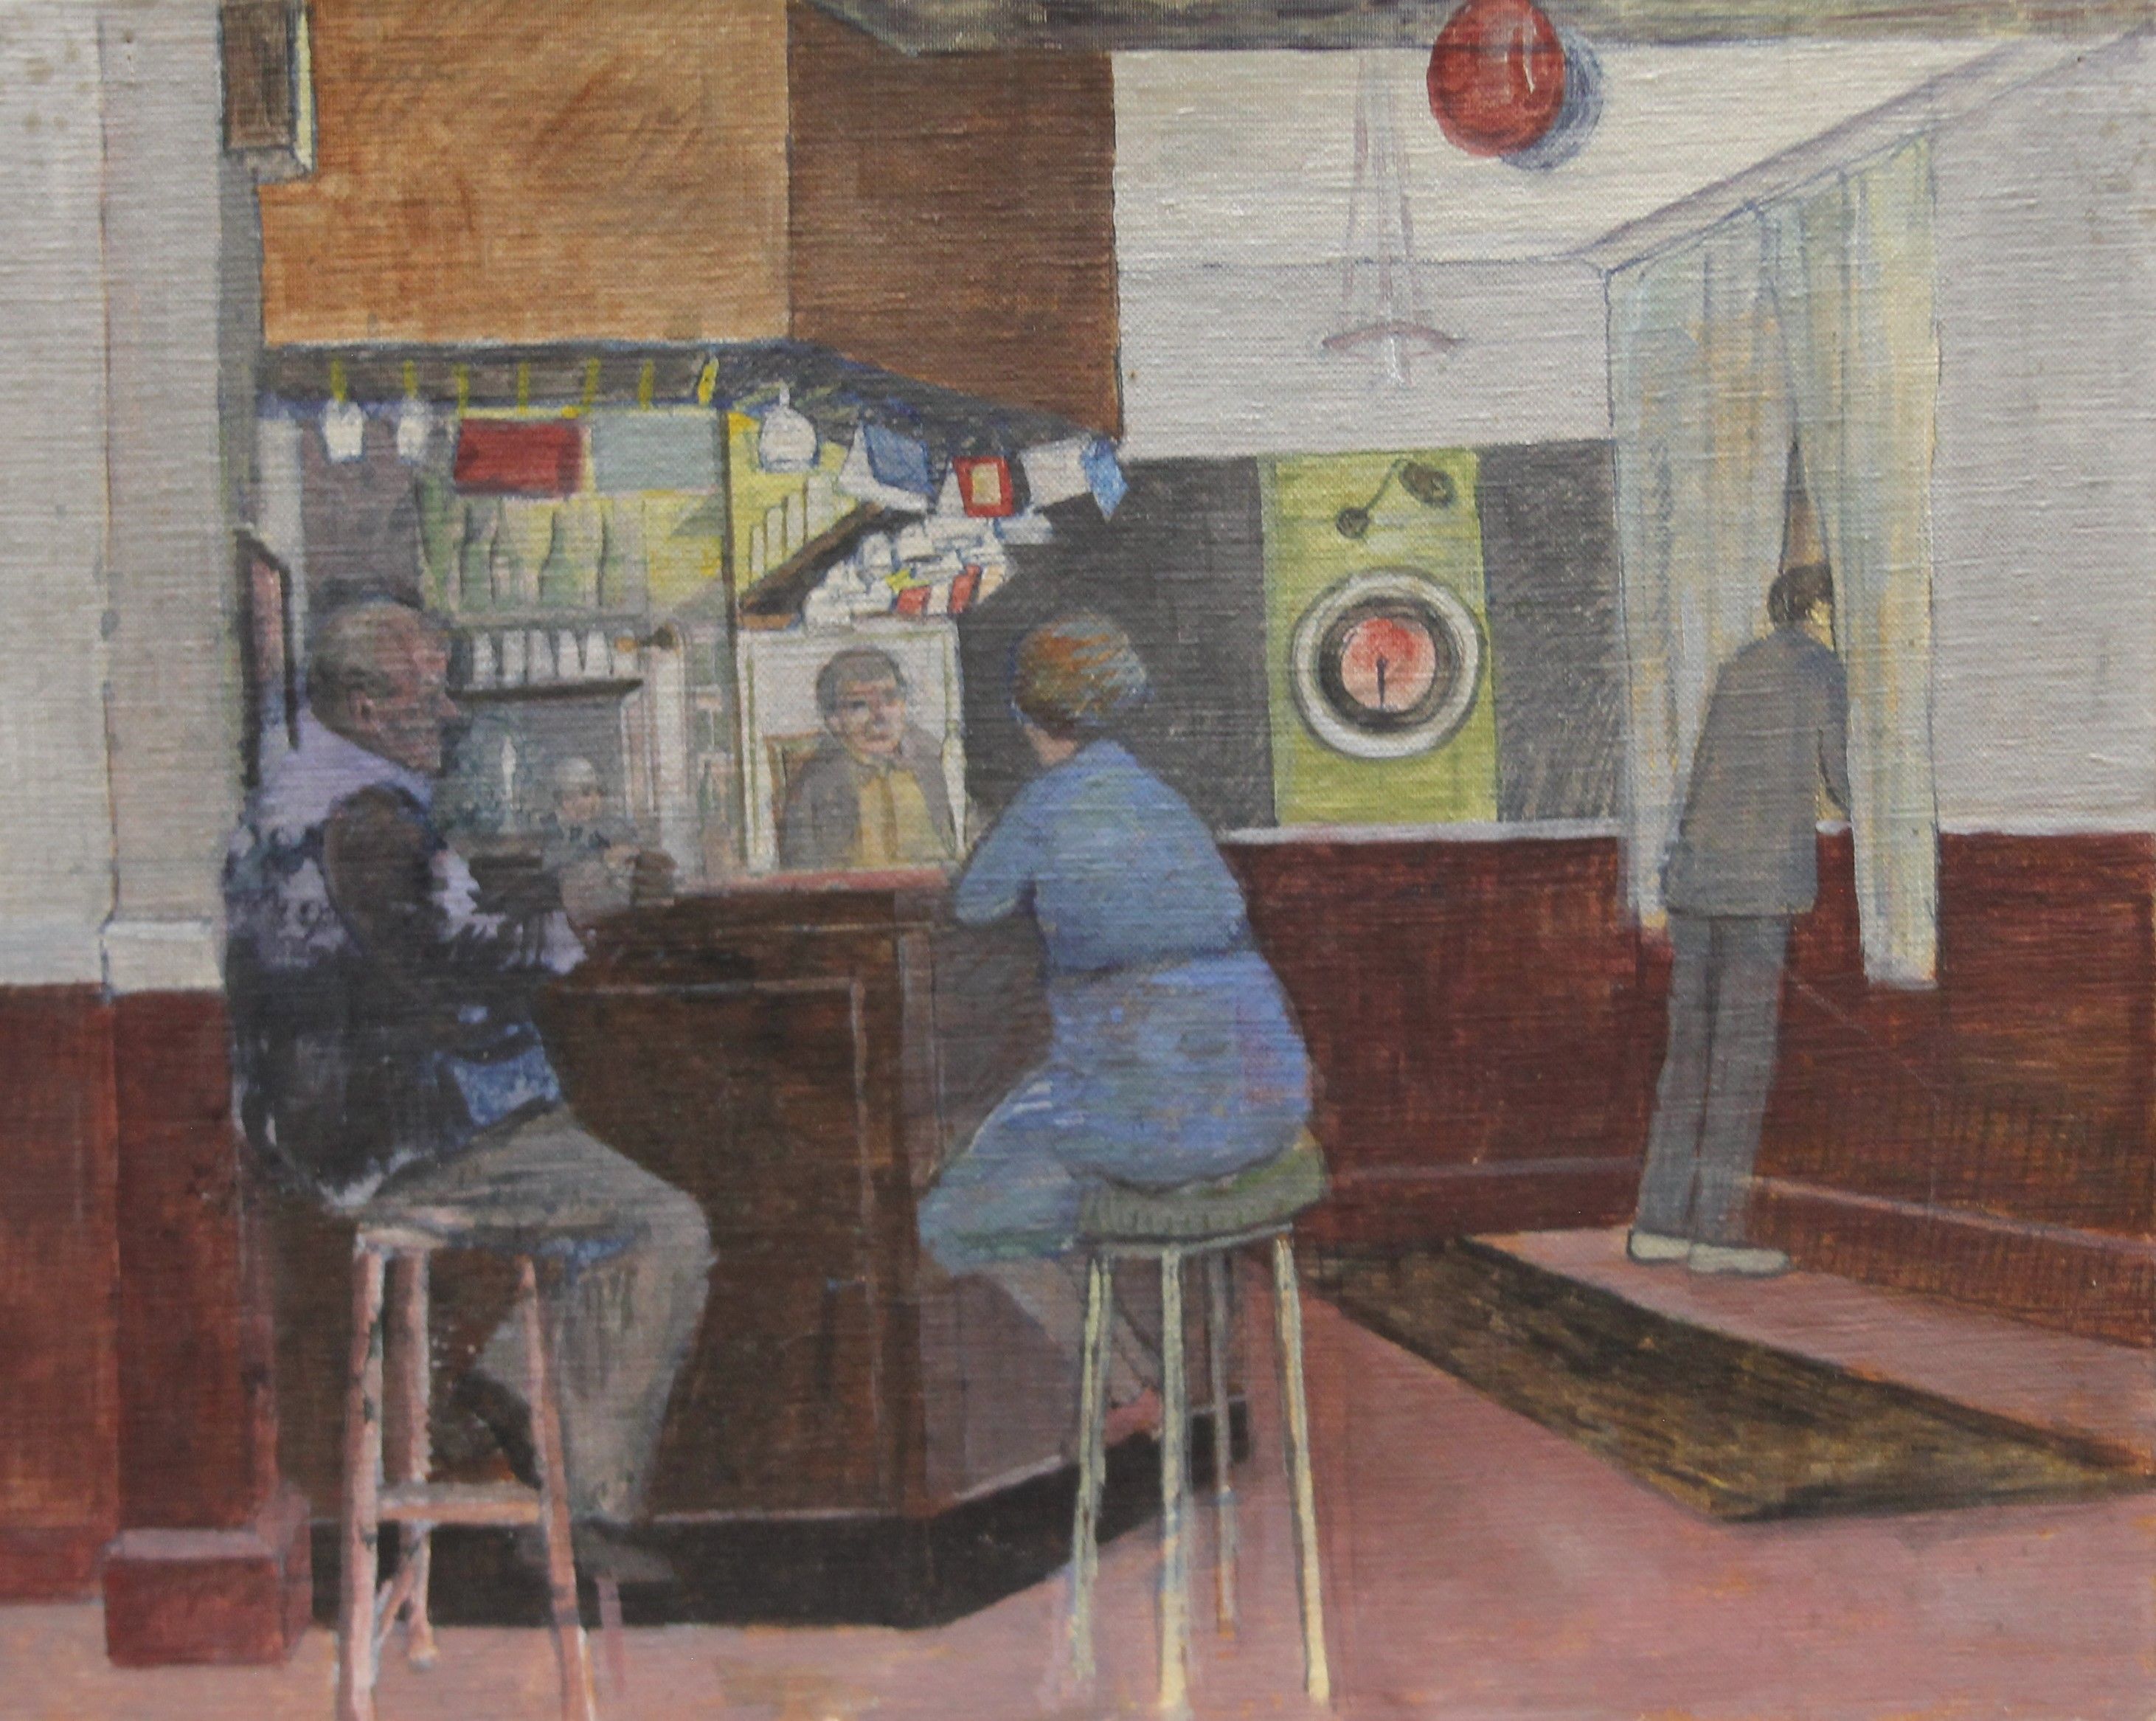 REG NORRIS British, The Bar and a Portrait of a Man, the latter signed. The largest 51 x 41 cm.